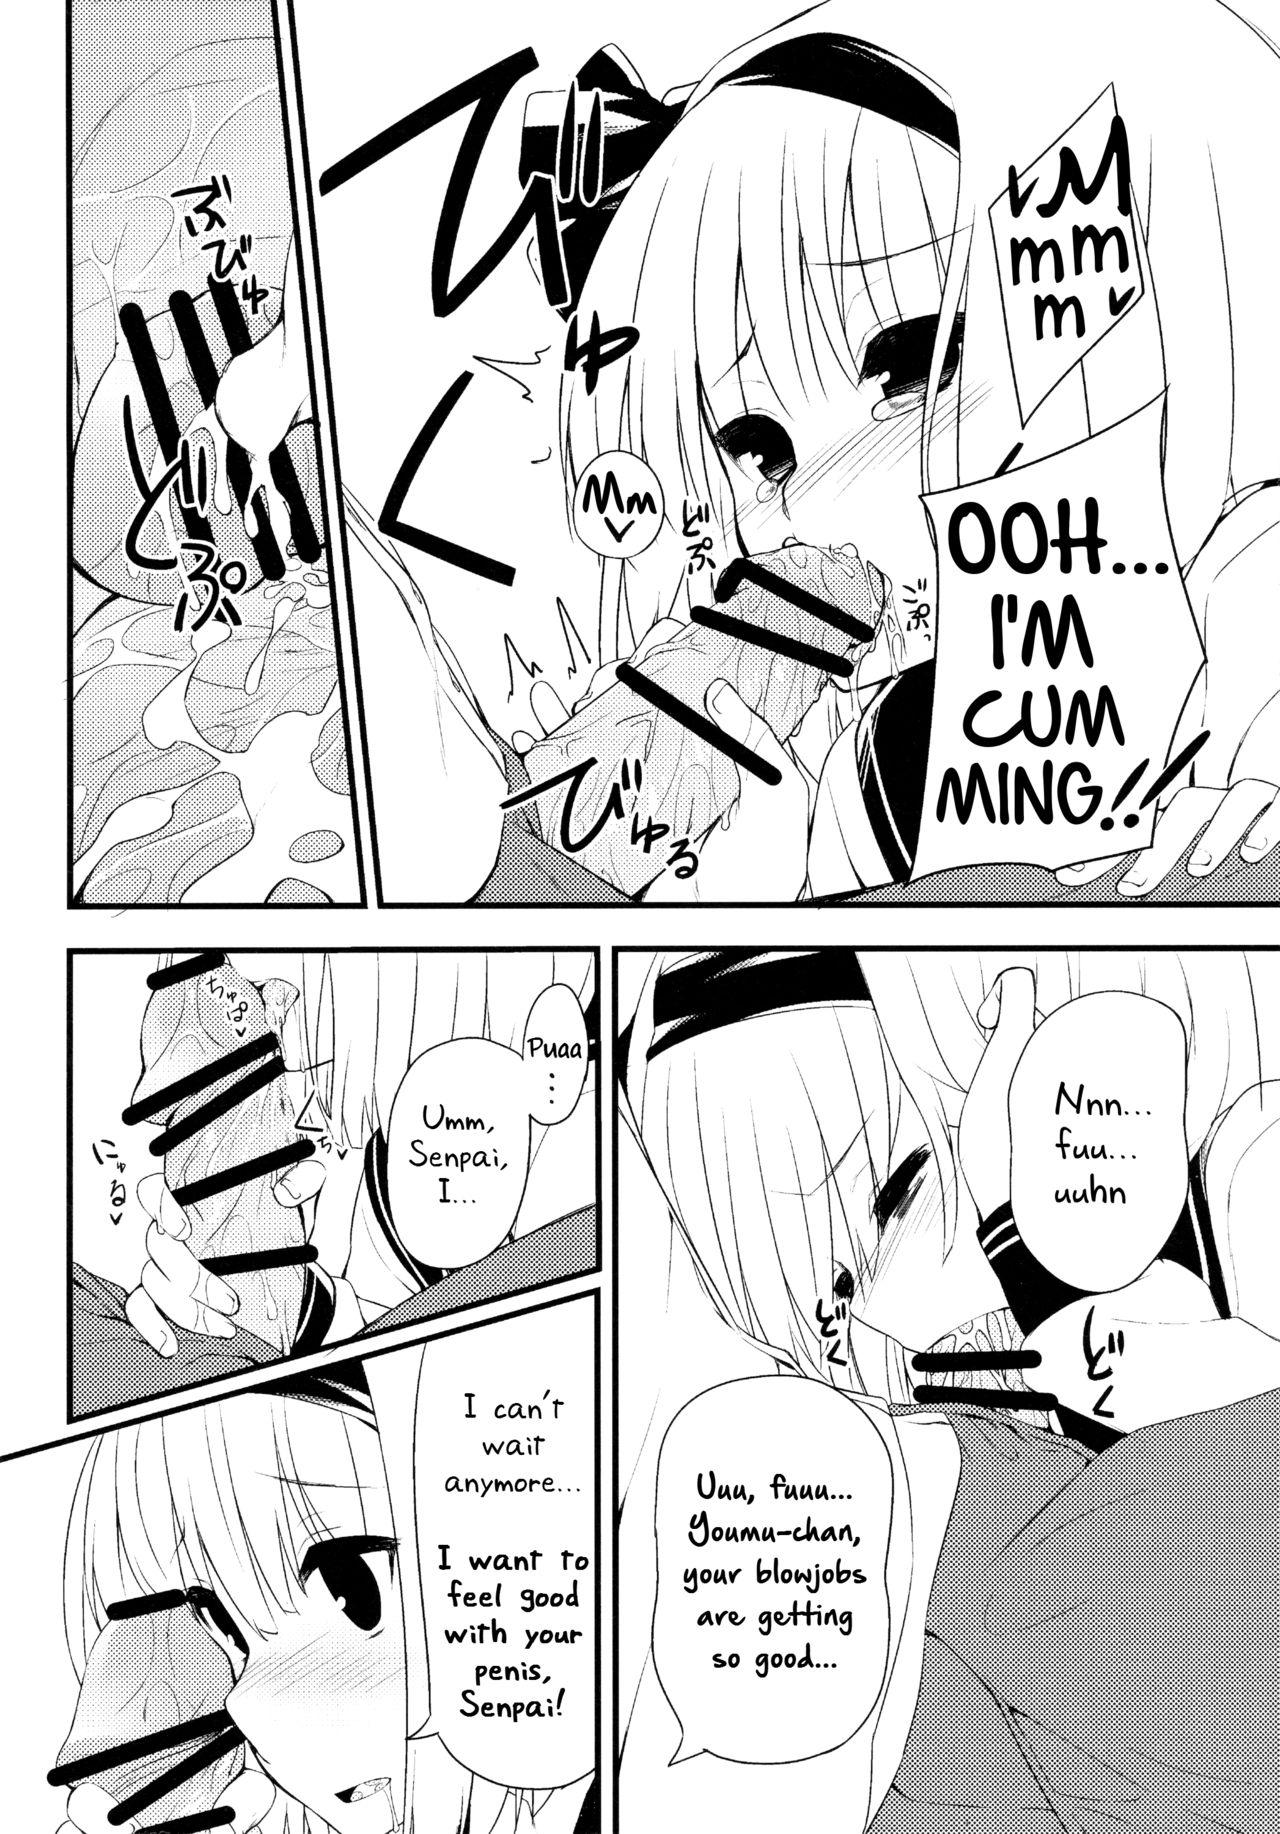 Porn Star Youmu DAY's - Touhou project Ink - Page 11